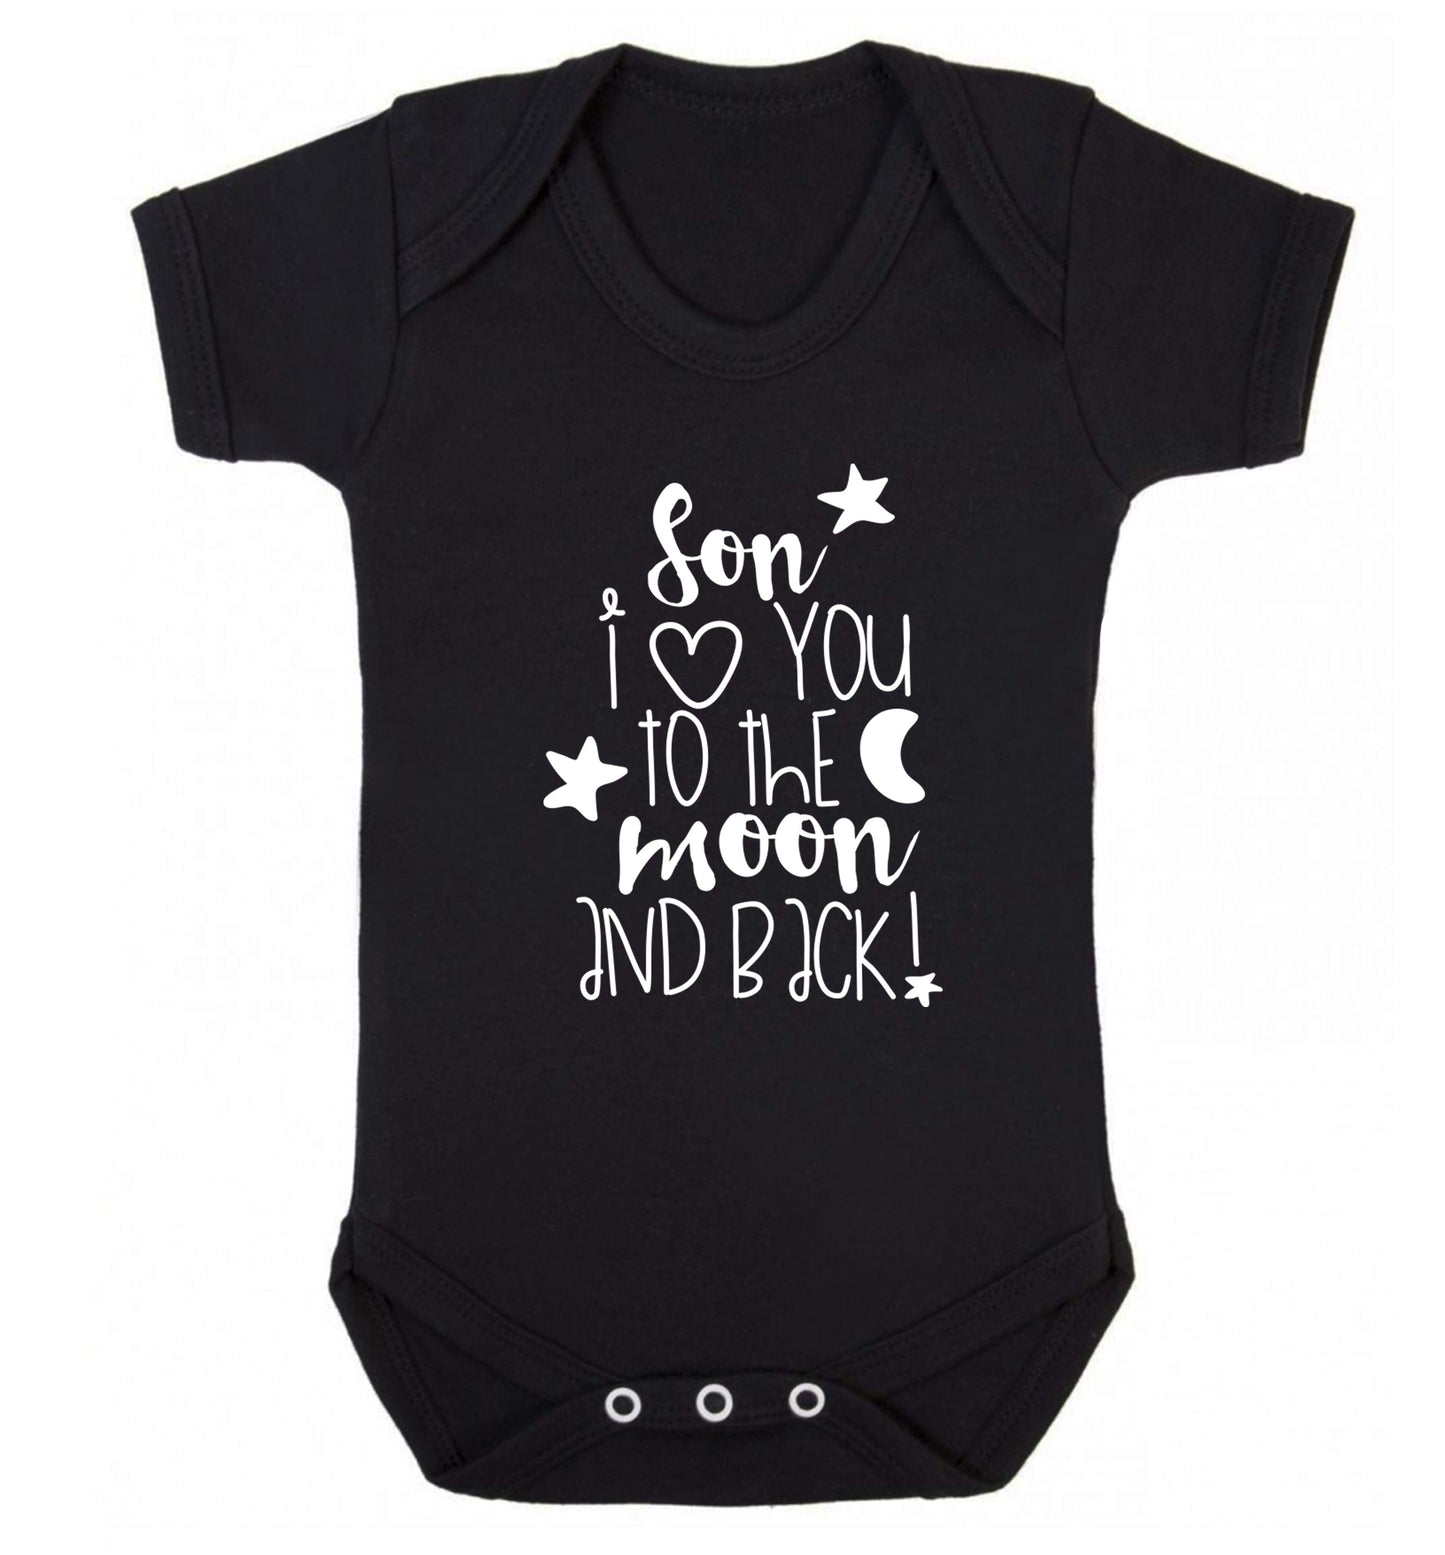 Son I love you to the moon and back Baby Vest black 18-24 months